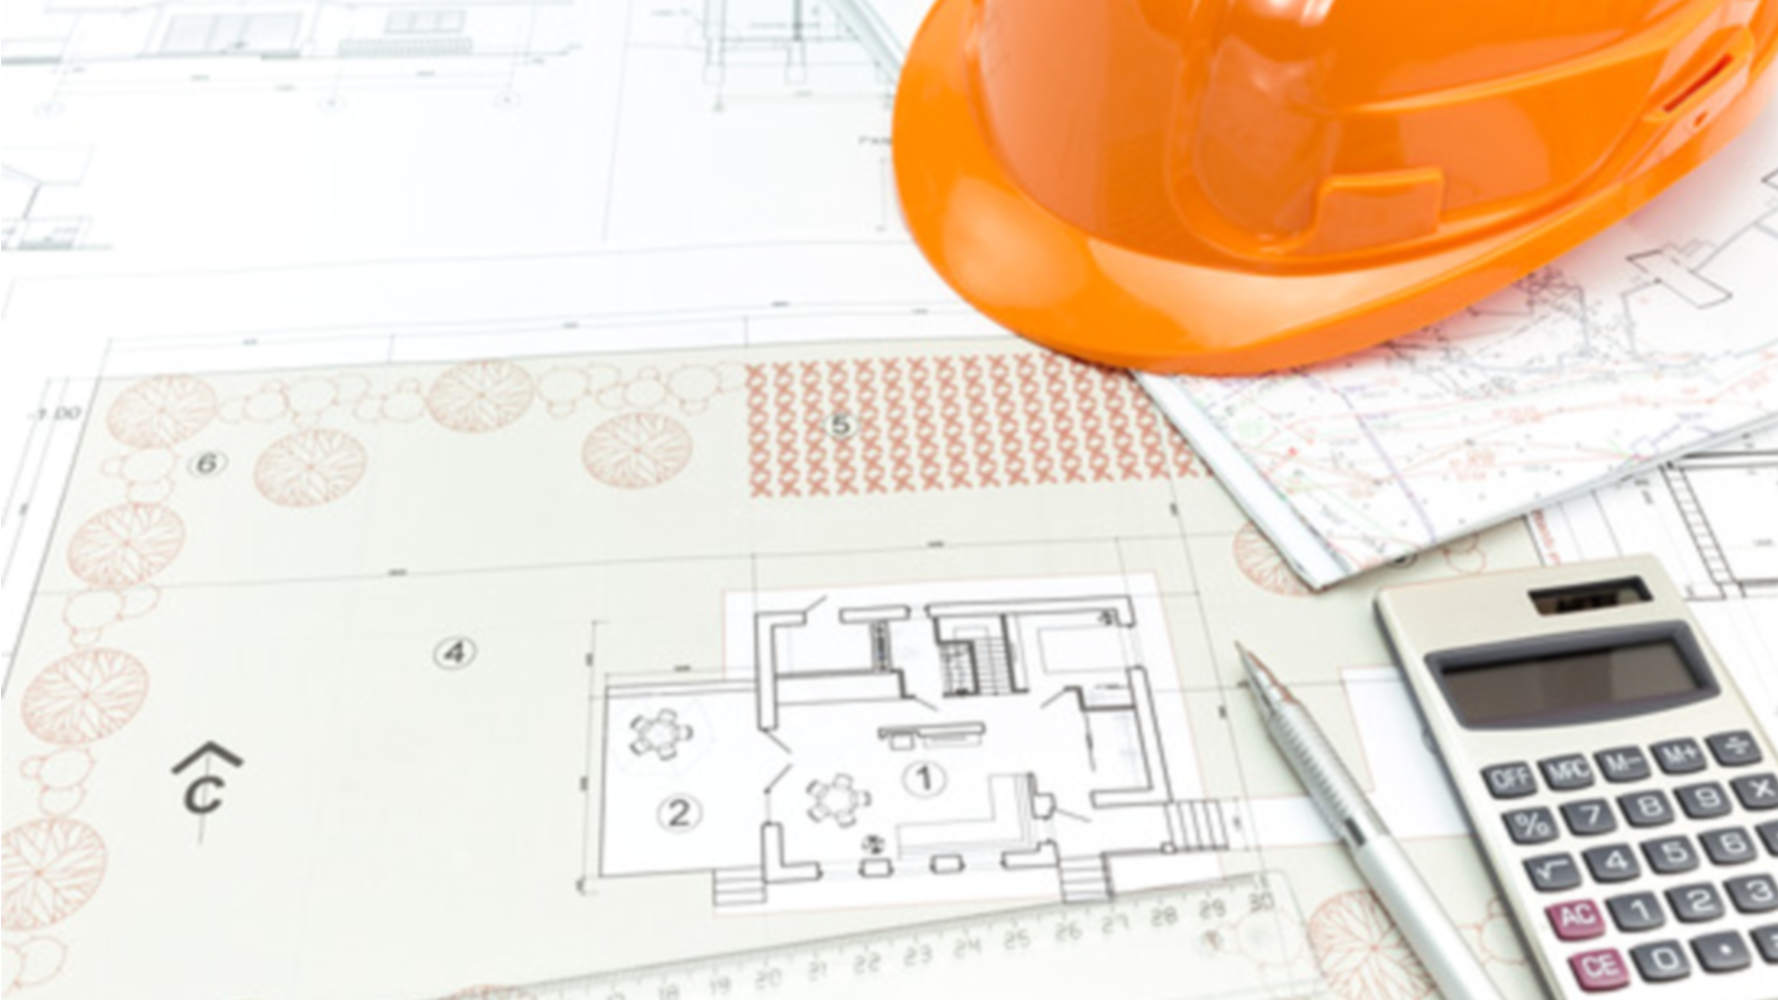 Electrical plans for a new house construction